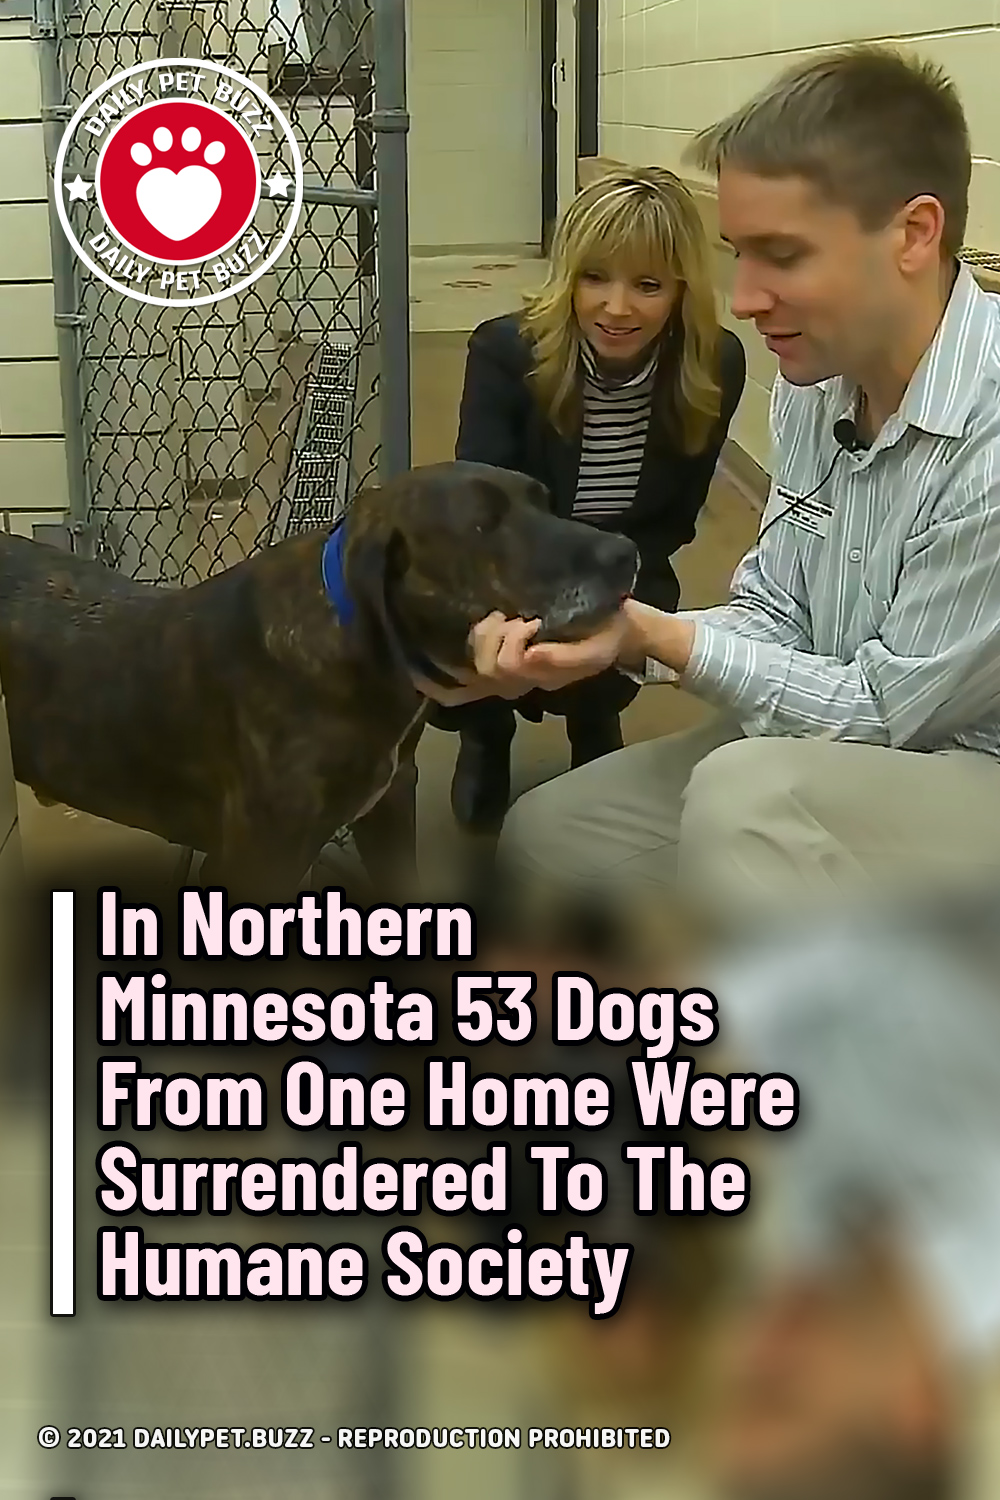 In Northern Minnesota 53 Dogs From One Home Were Surrendered To The Humane Society